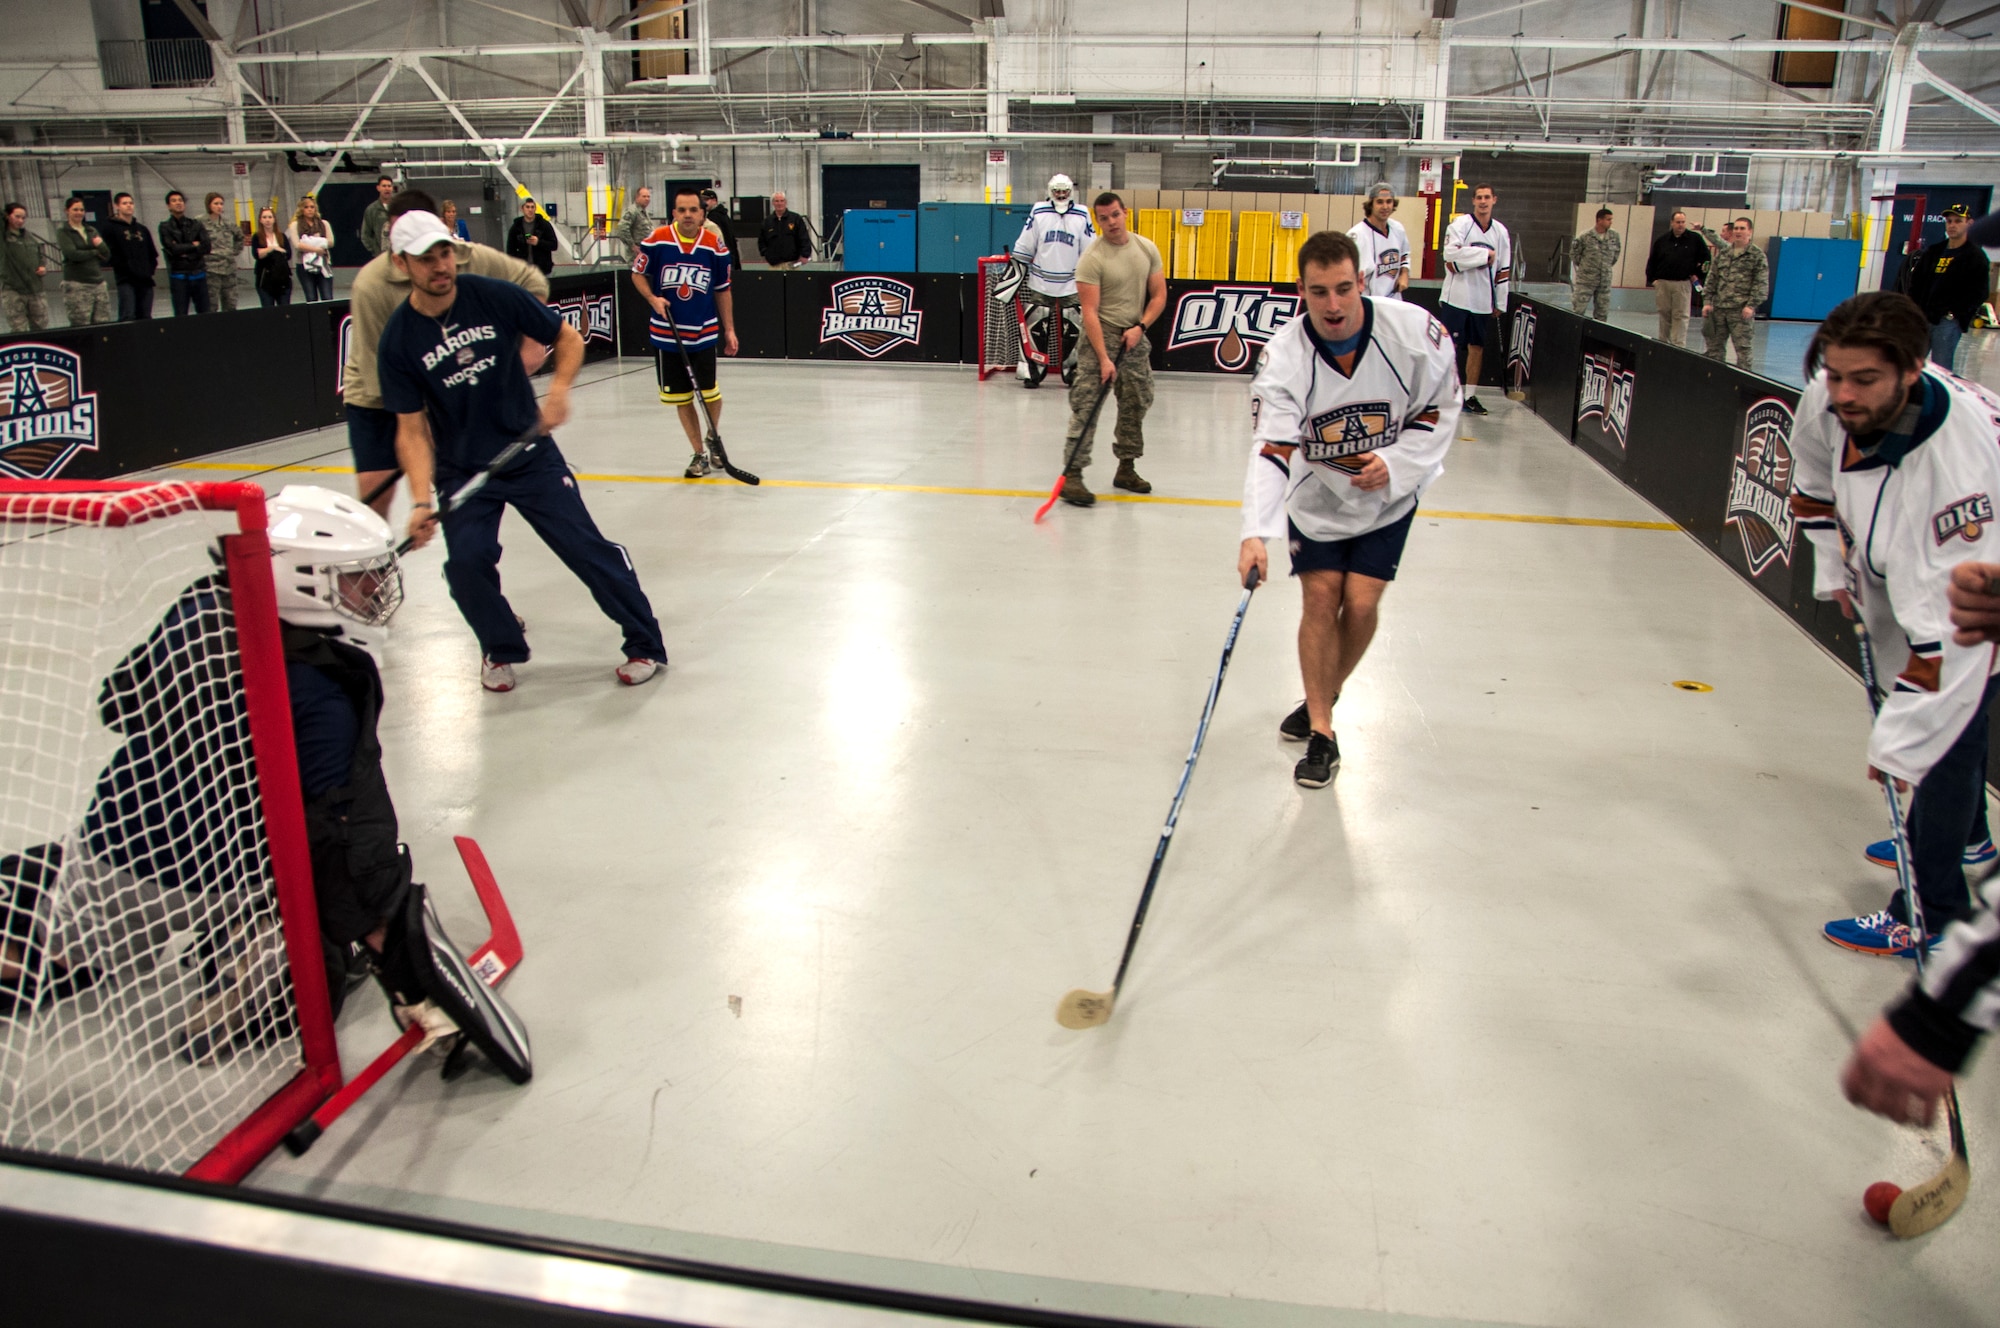 Master Sergeant Chris Shamiyeh slides to his right blocking Oklahoma City Barons’ Richard Bachman’s shot during a floor hockey game in the Maintenance Squadron hangar January 14, 2014.  Bachman was one of four Barons players to volunteer for the game here as part of a winning raffle by 507th Civil Engineering Squadron’s Senior Master Sgt. Daniel Bostwick.  Five members from the 507th and 137th Oklahoma Air National Guard Air Refueling Wings participated in the game as dozens more took time to come watch.  The four Barons hockey players along with two cheerleaders toured a KC-135R Stratotanker prior to the game.  The Oklahoma City Barons are part of the National Hockey League’s Edmonton Oilers.  (U.S. Air Force photo/Senior Airman Mark Hybers)